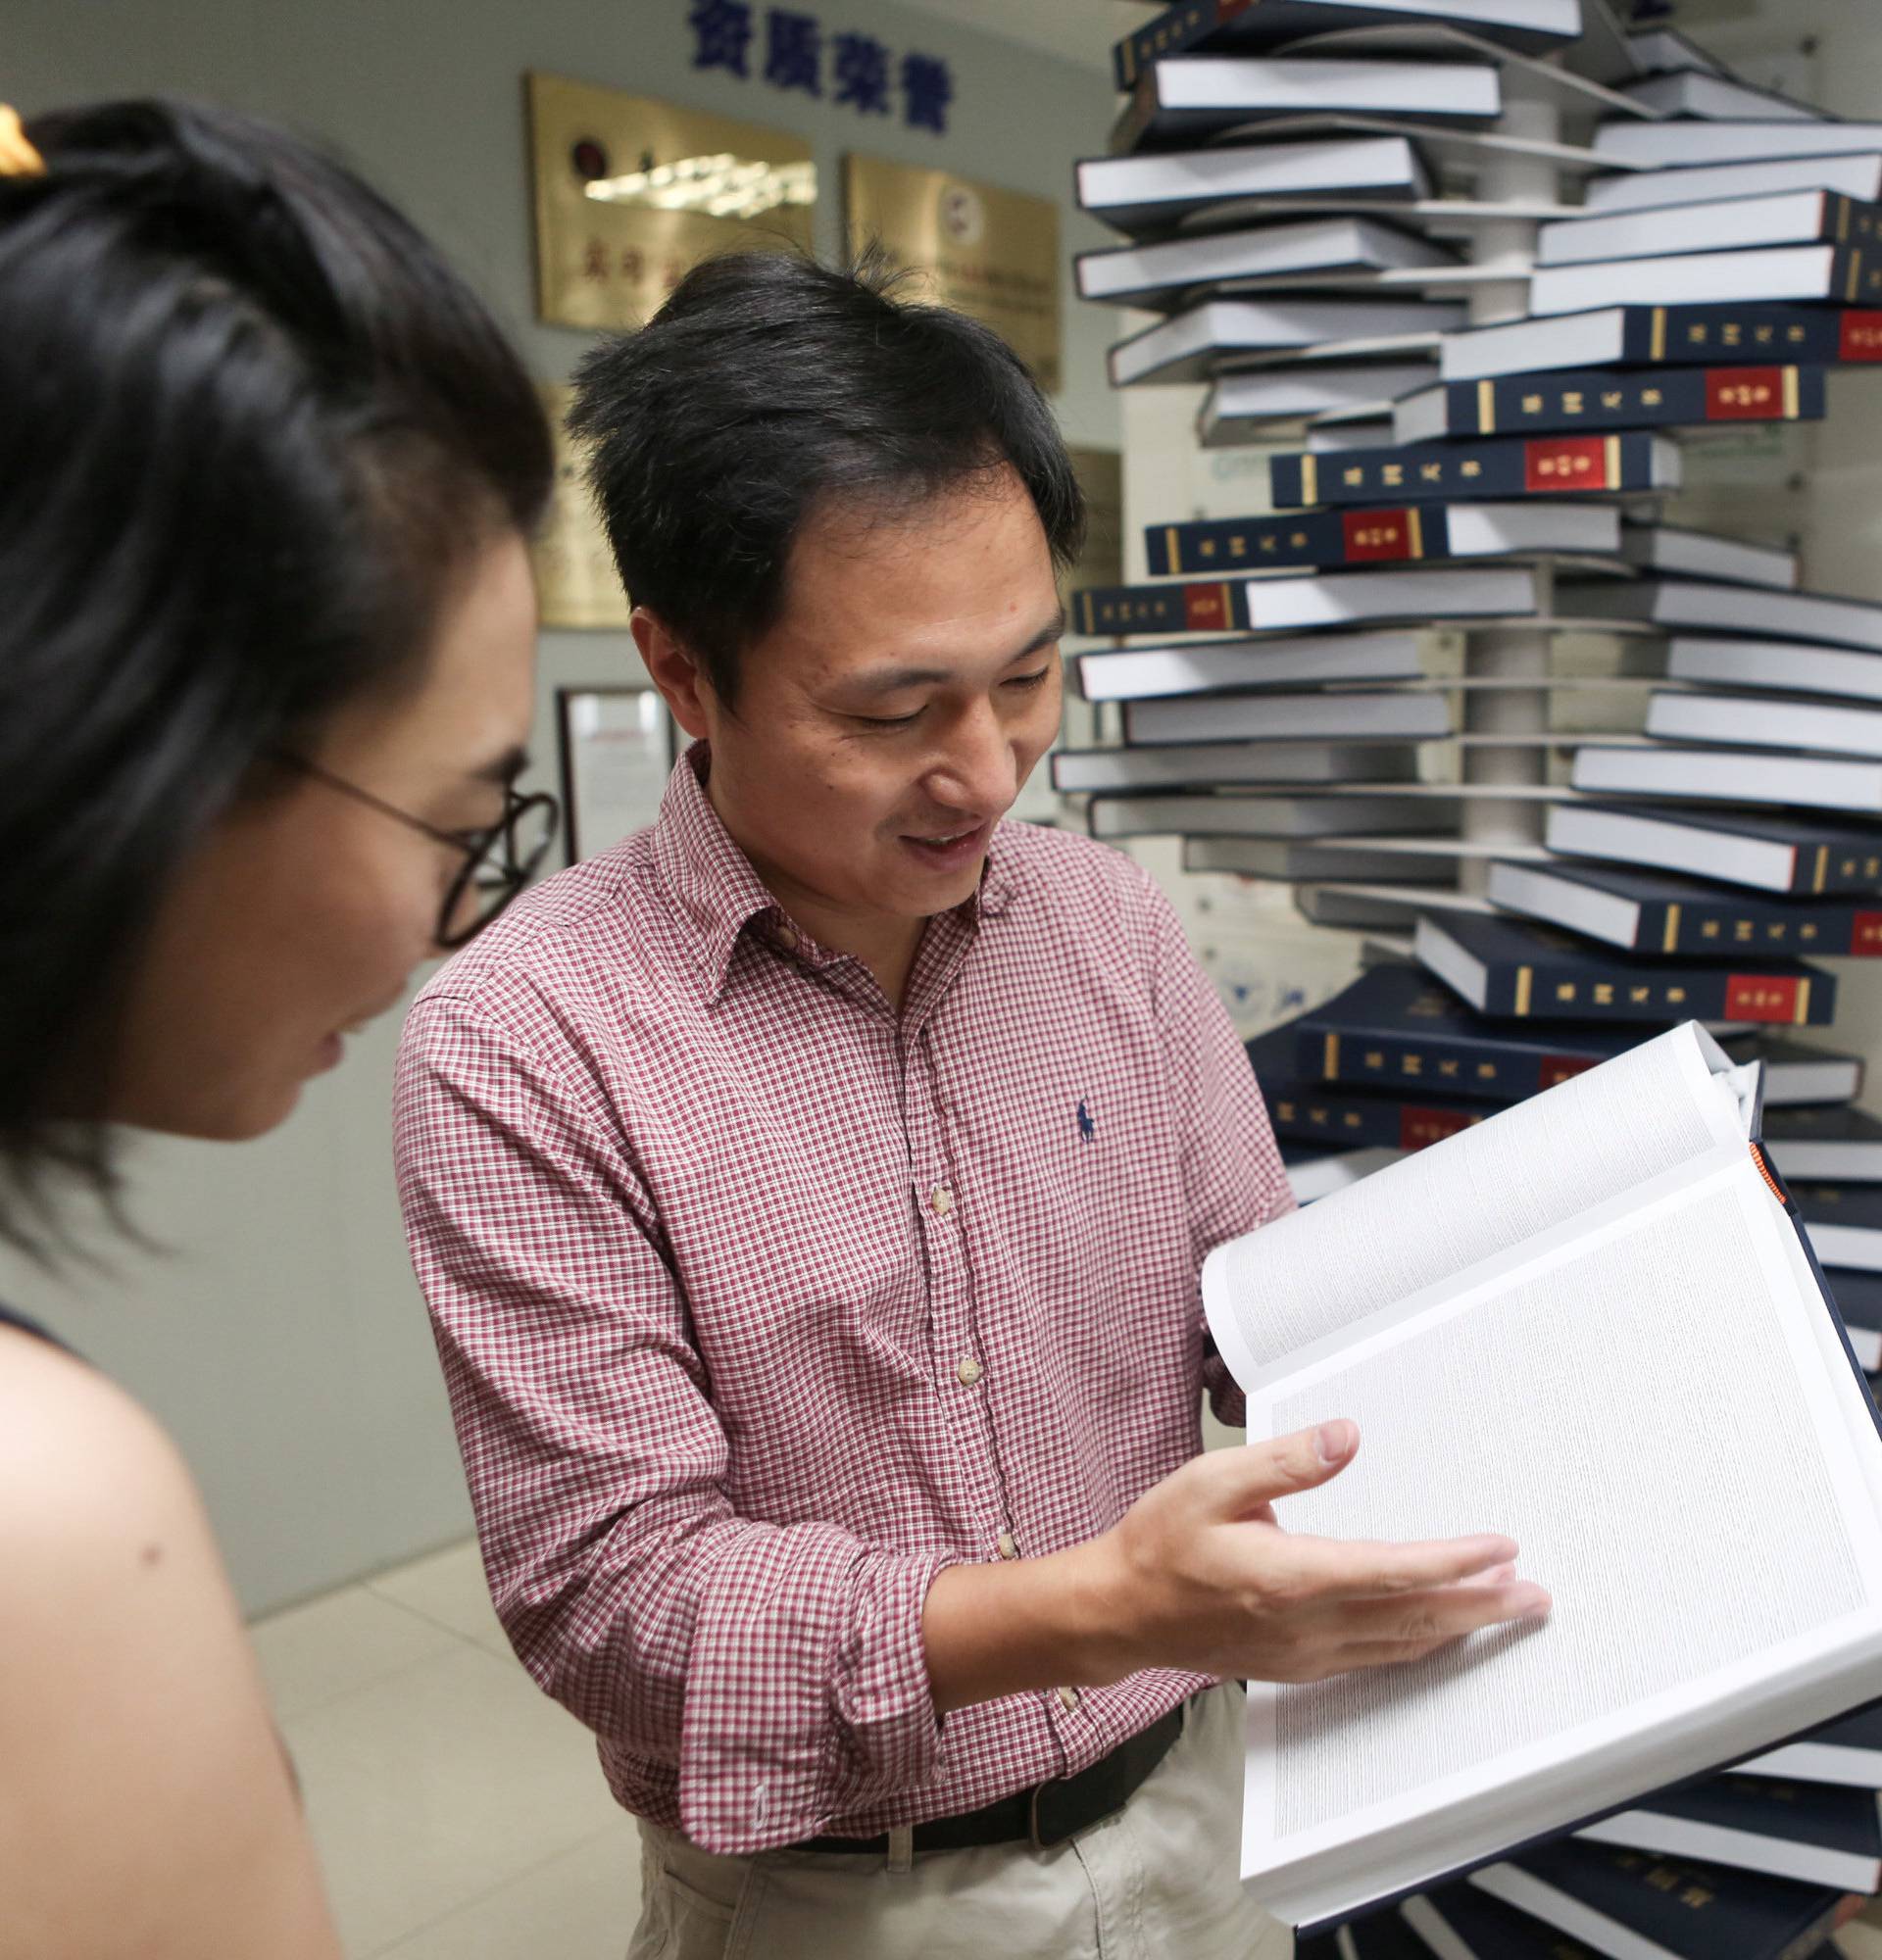 Scientist He Jiankui shows "The Human Genome", a book he edited, at his company Direct Genomics in Shenzhen